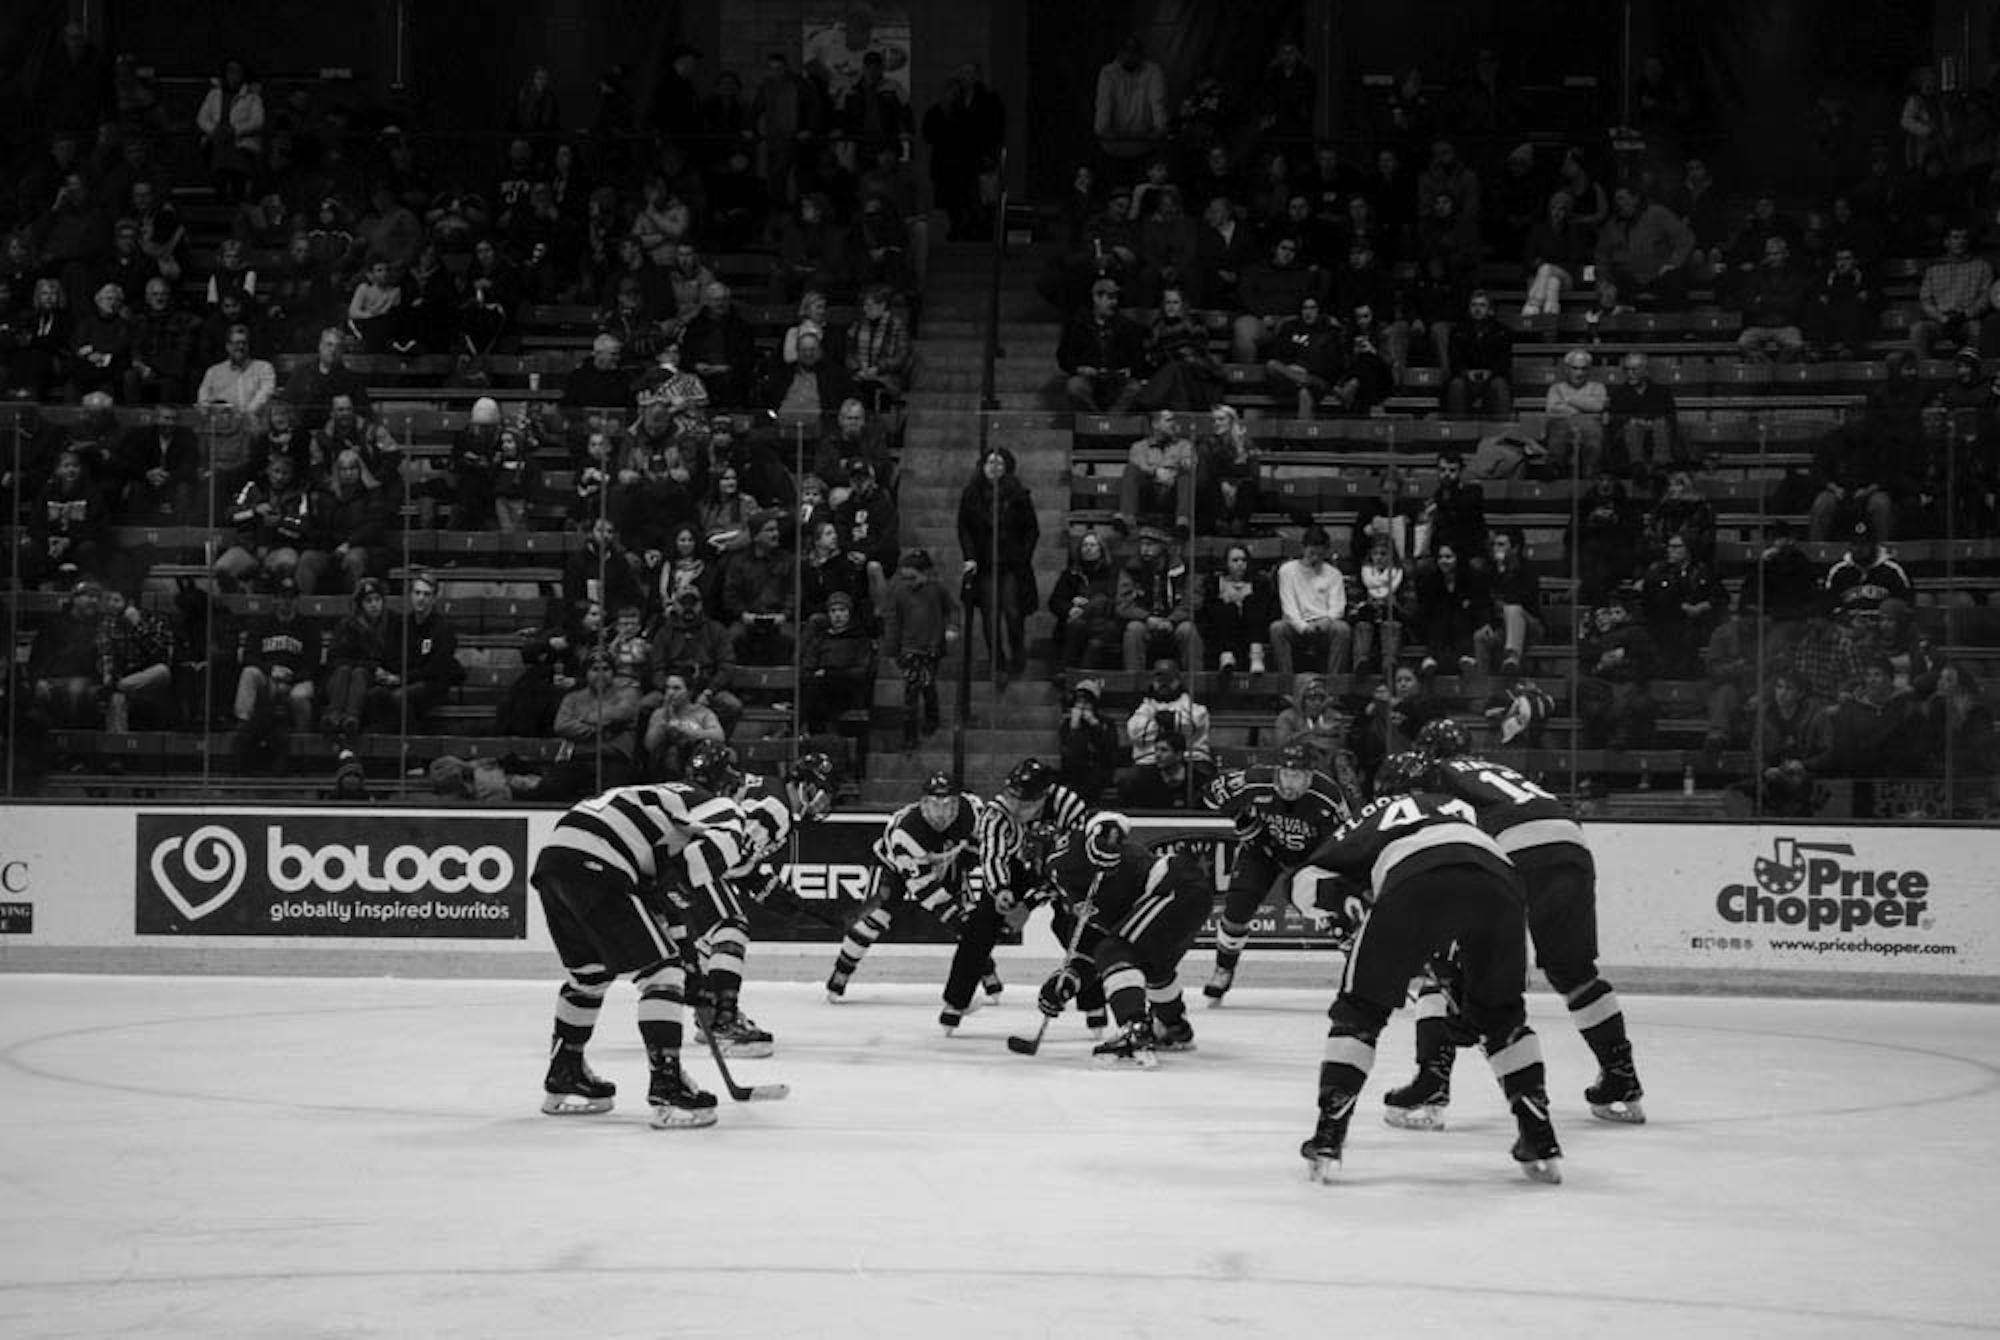 Fresh off a 7-6 victory over Harvard University, the Dartmouth men's hockey team looks forward to its match against Princeton University.&nbsp;